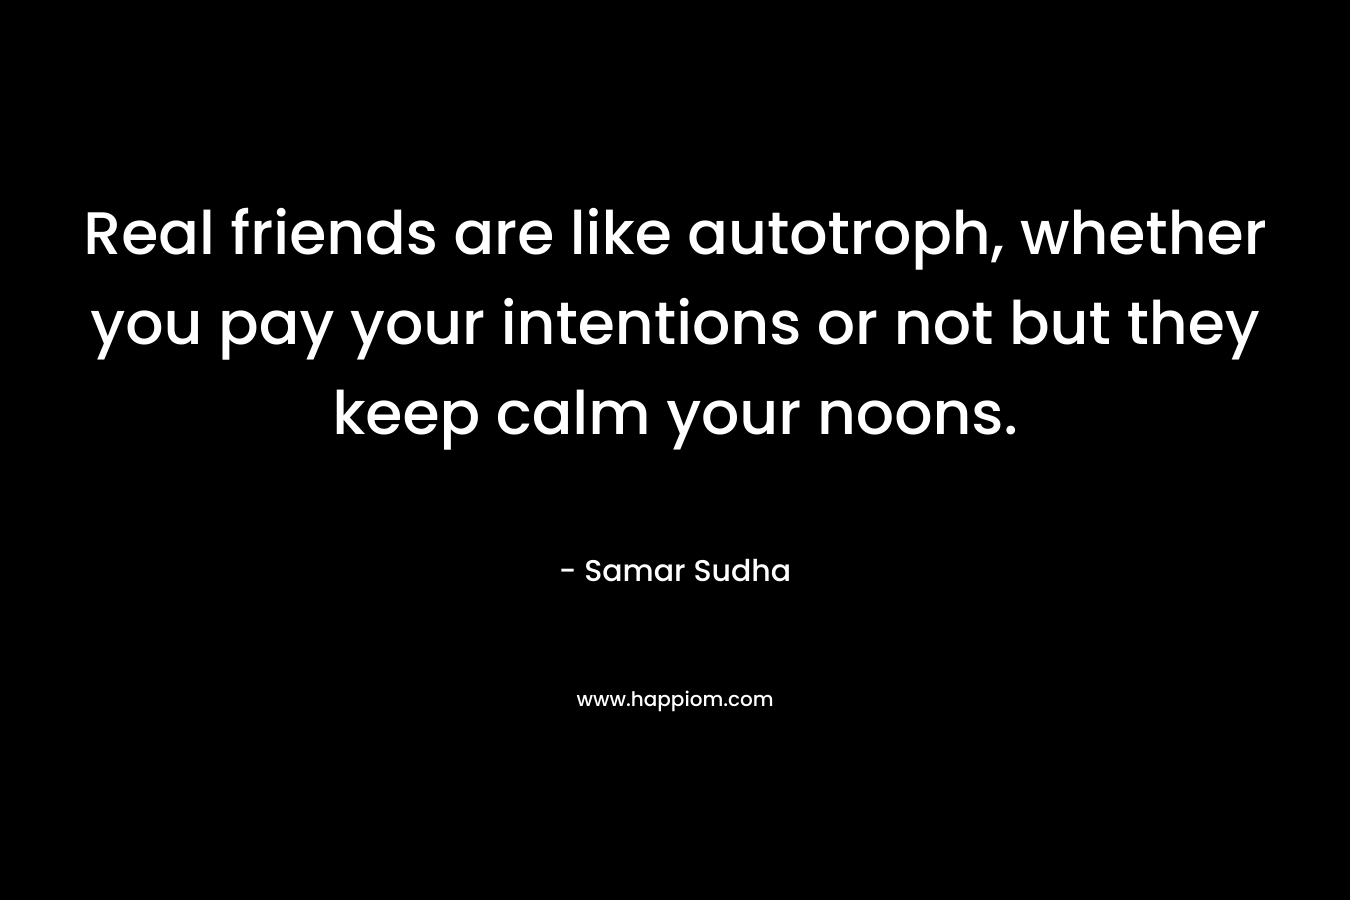 Real friends are like autotroph, whether you pay your intentions or not but they keep calm your noons. – Samar Sudha